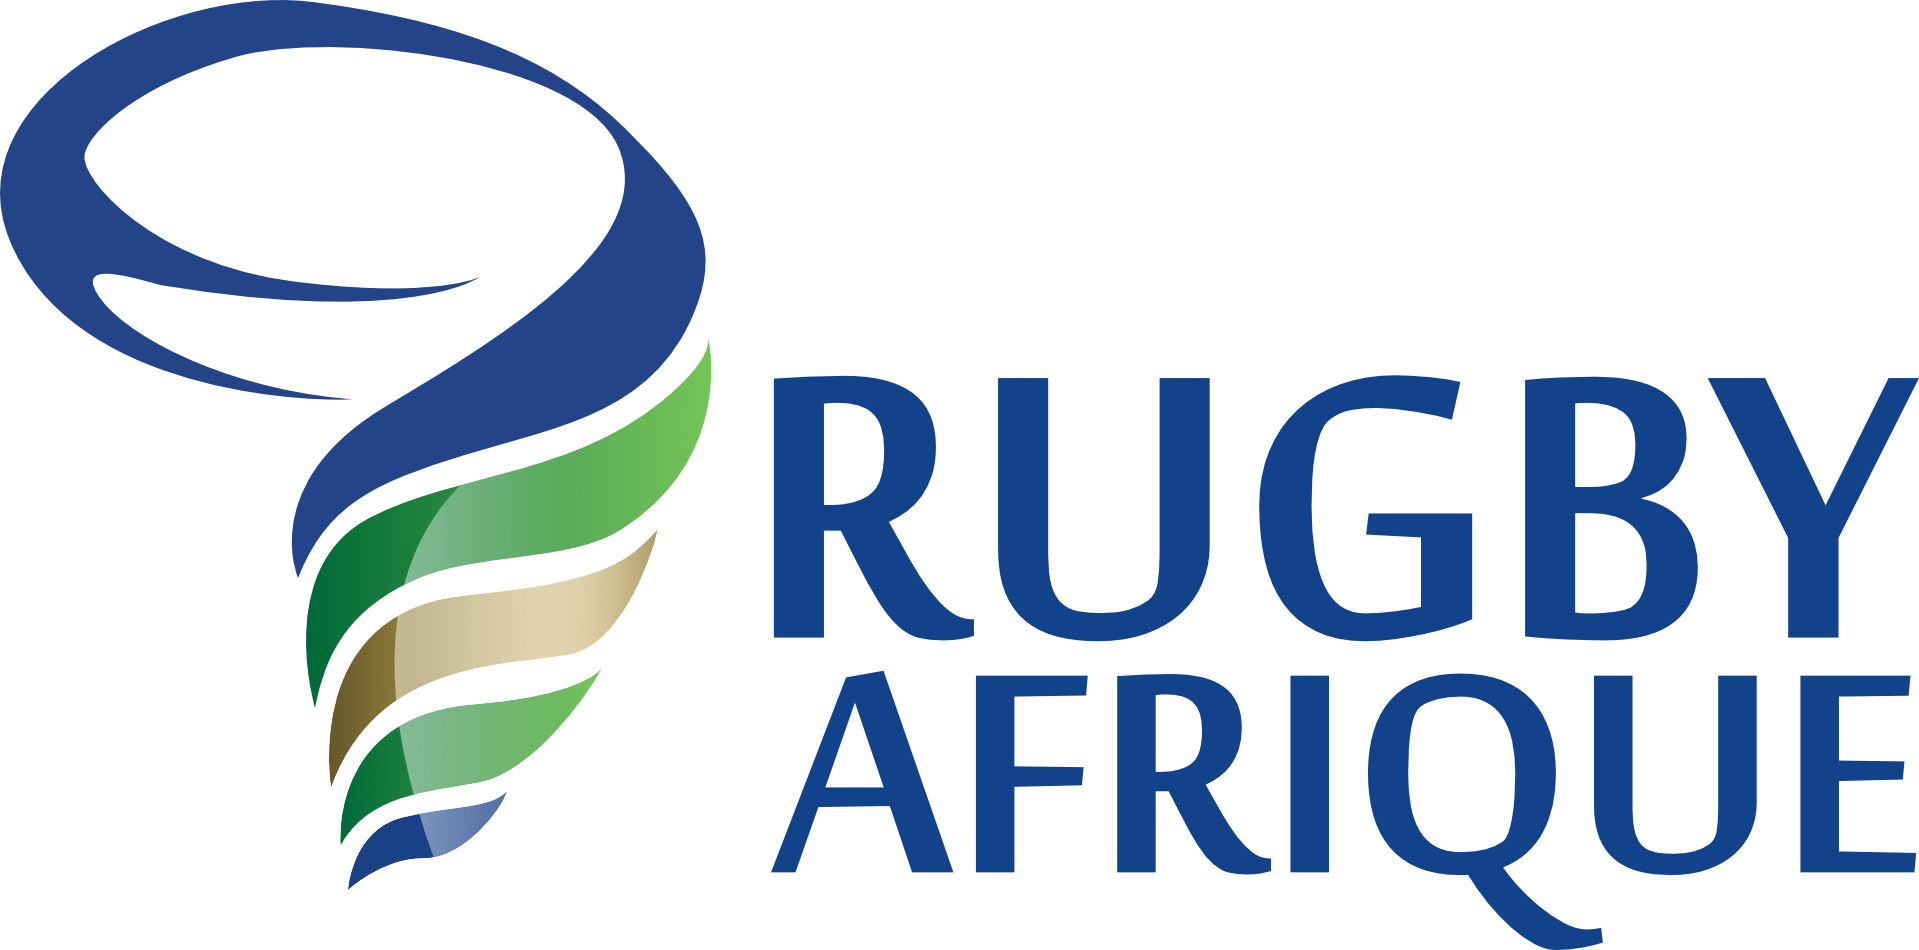 French Rugby Federation President Welcomes Rugby Africa President to Paris for Discussions on a New Era of Partnership